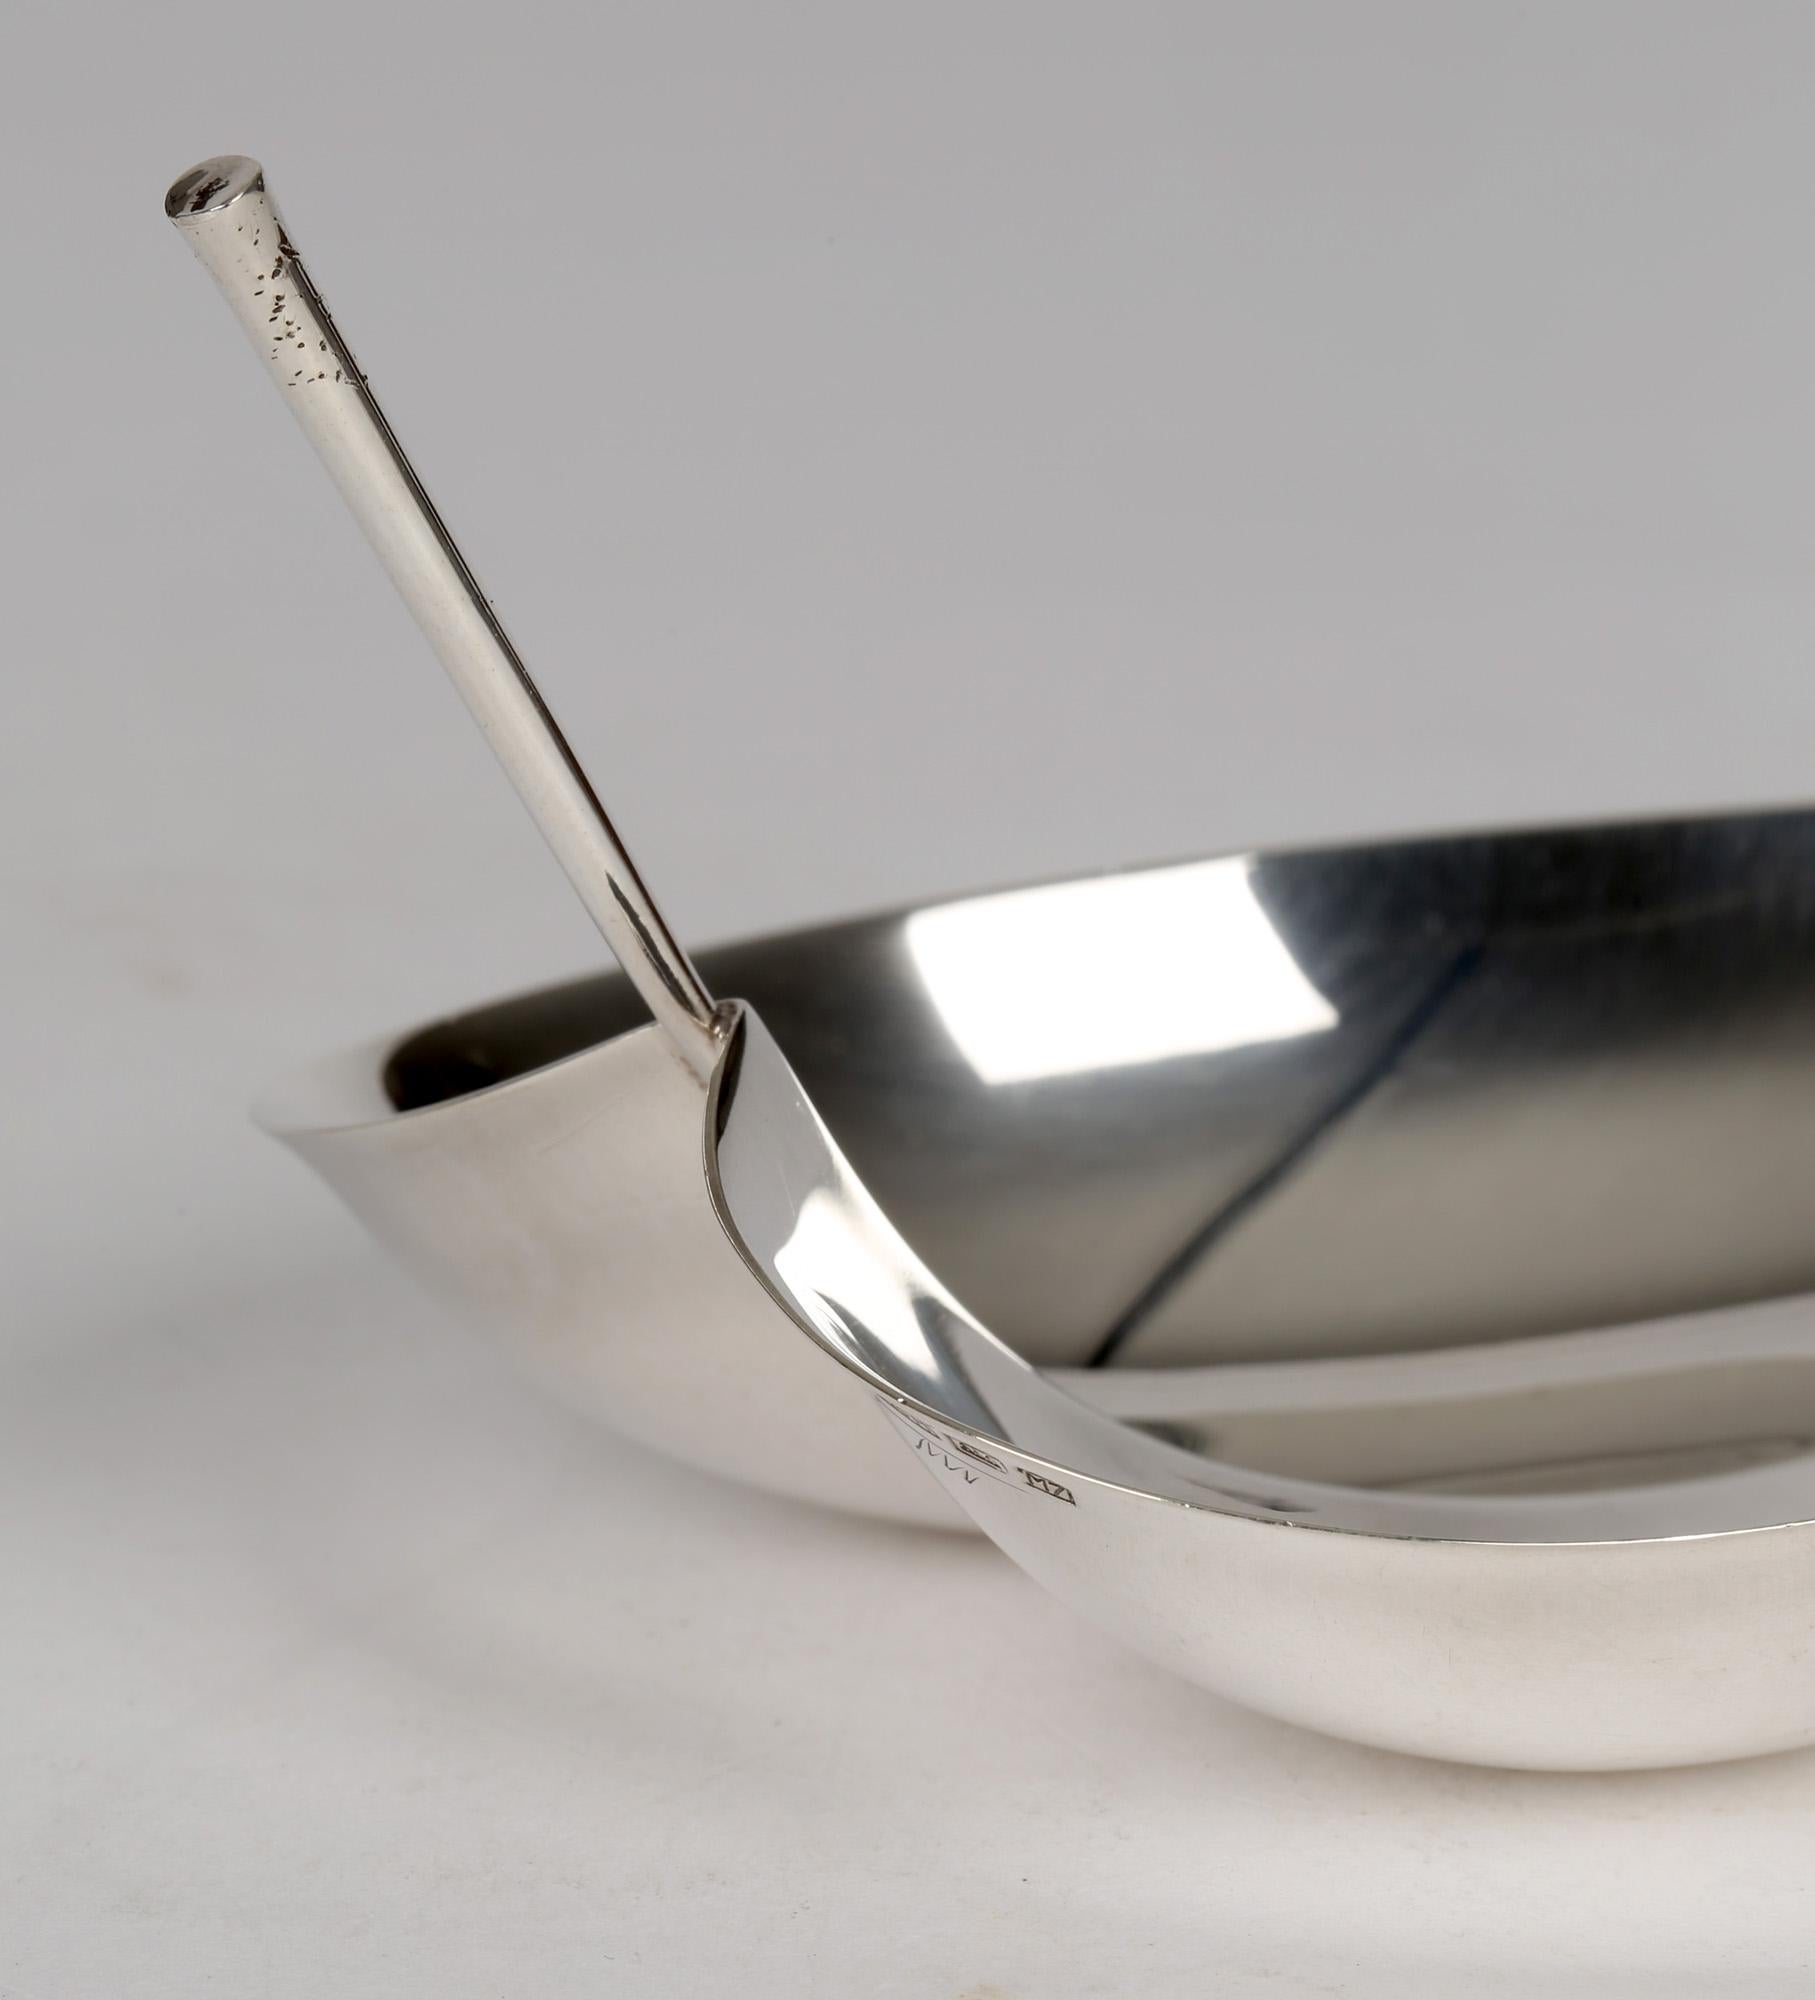 A stunning mid-century Finnish silver leaf shaped handled bon bon dish designed by Tapio Wirkkala (1915-1985) dated 1965. The dish is of a simple leaf shaped design formed like a heart with a raised rim and with a central ridge with a raised stalk